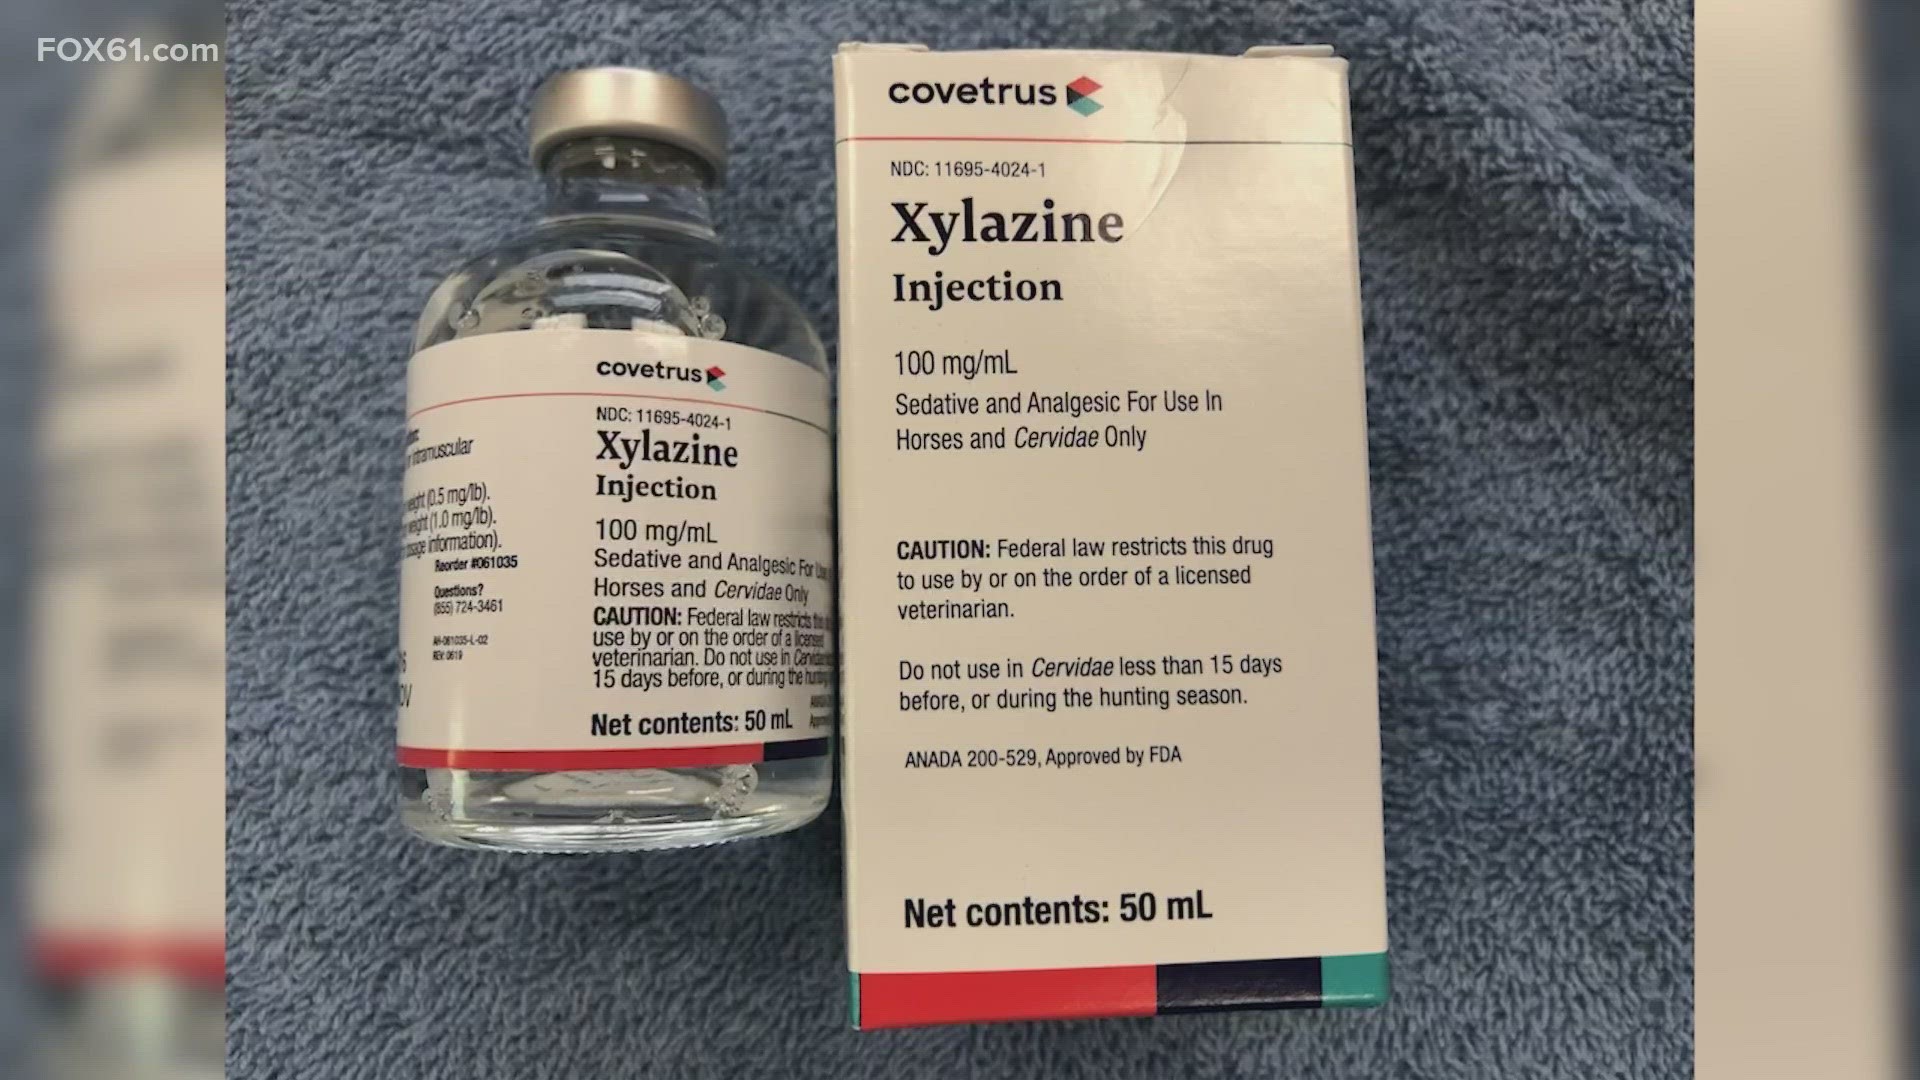 Xylazine is a potent veterinary medication that has been widely mixed with opioids like fentanyl and is easily obtainable online.